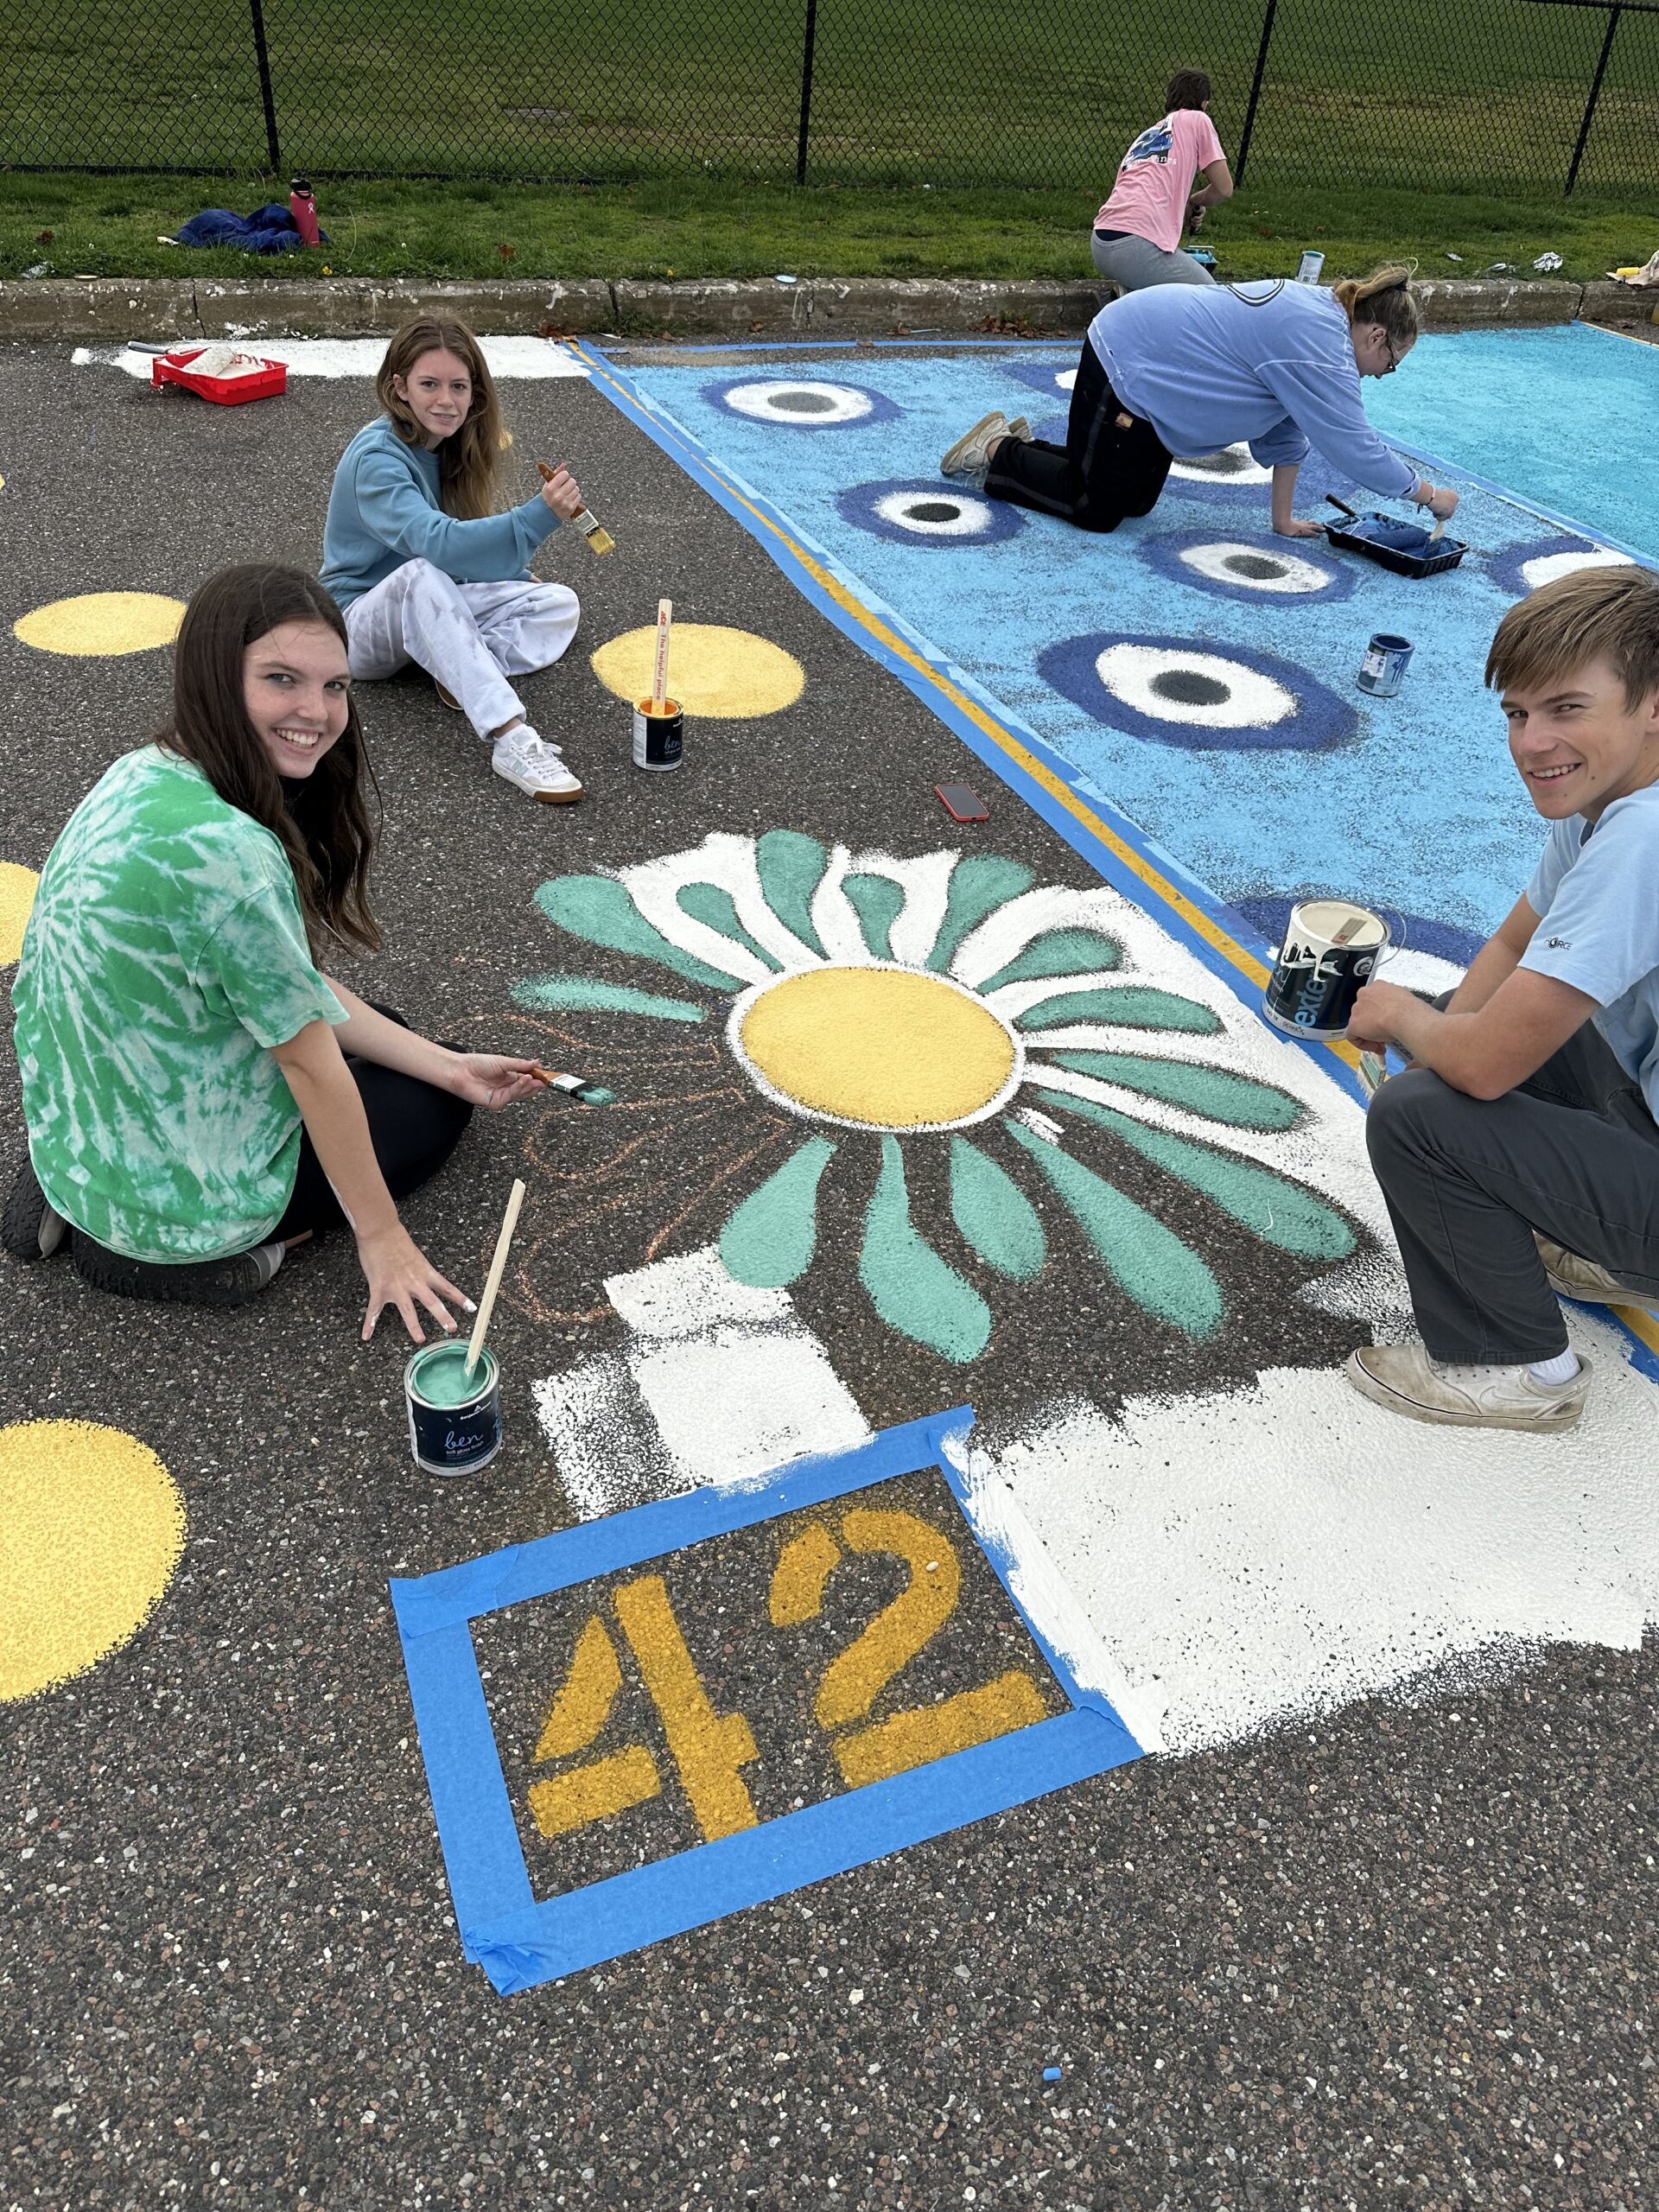 Southampton High School’s Class of 2023 recently painted their own parking spots, bringing school spirit and a colorful vibe to the senior parking lot. The painting opportunity was a first at the high school, and administration and senior class advisers hope it will inaugurate a new tradition. COURTESY SOUTHAMPTON SCHOOL DISTRICT